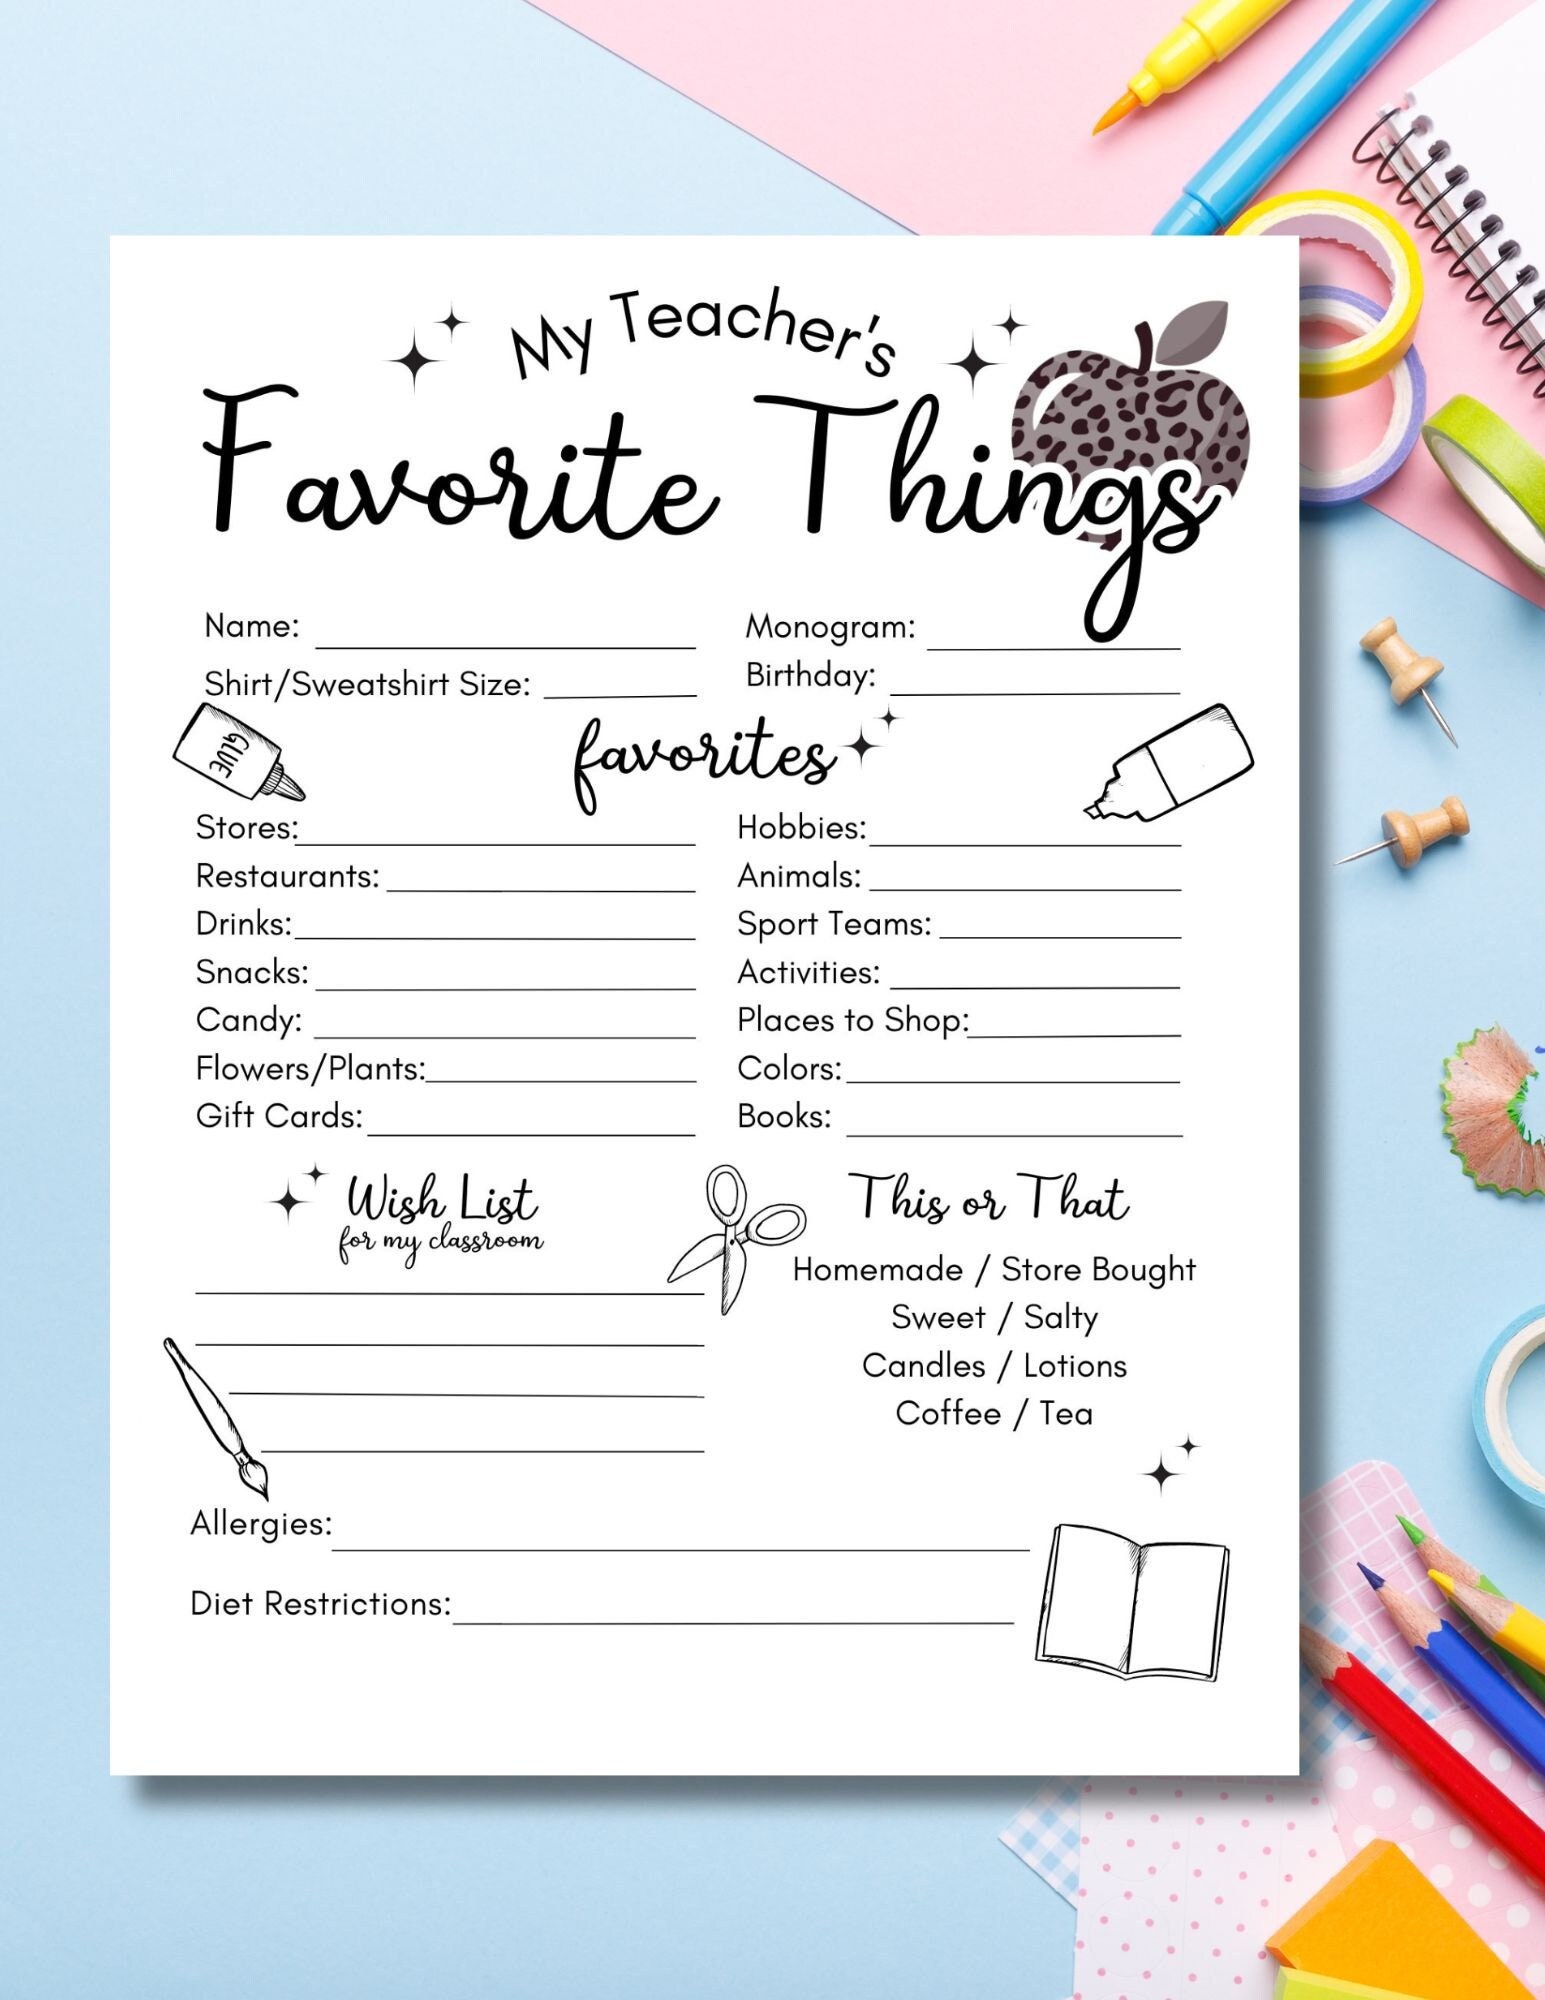 My Teacher's Favorite Things Questionnaire Printable Digital Download ...